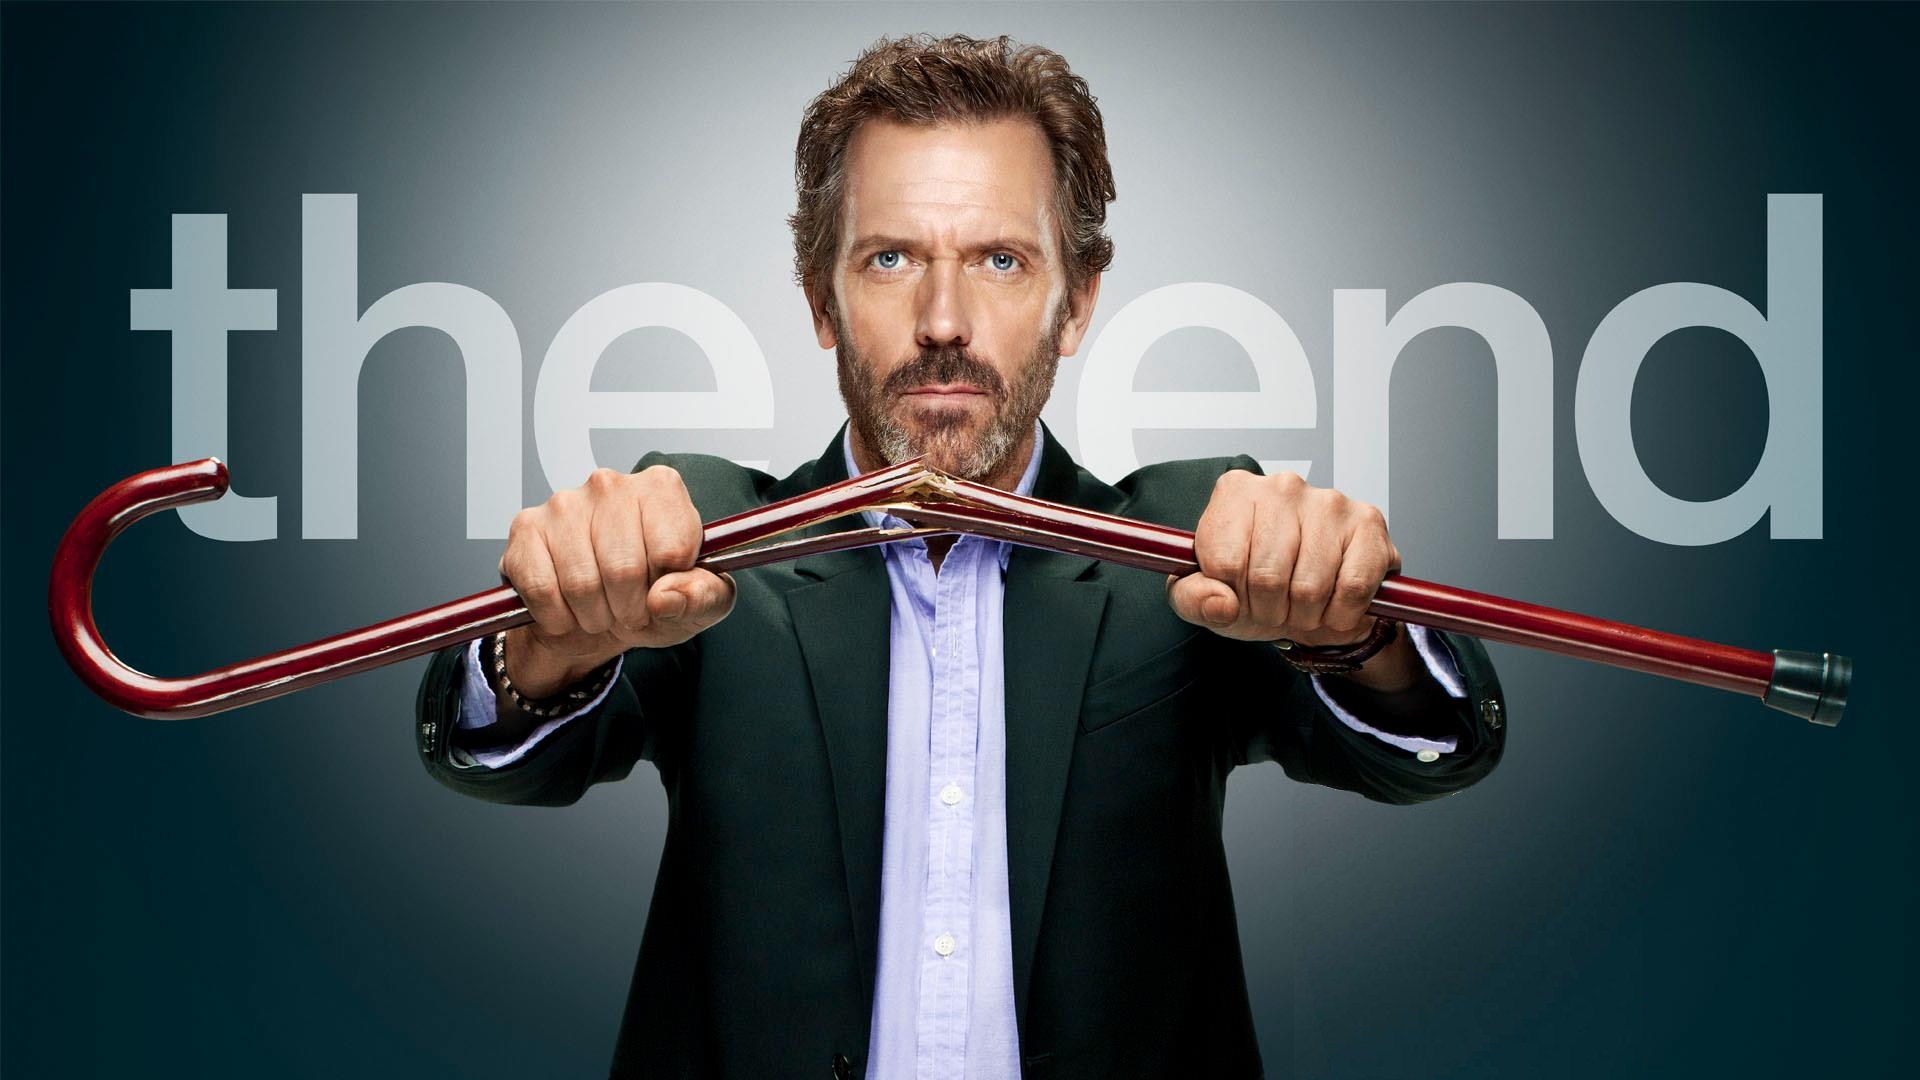 Dr. Gregory House from House M.D.